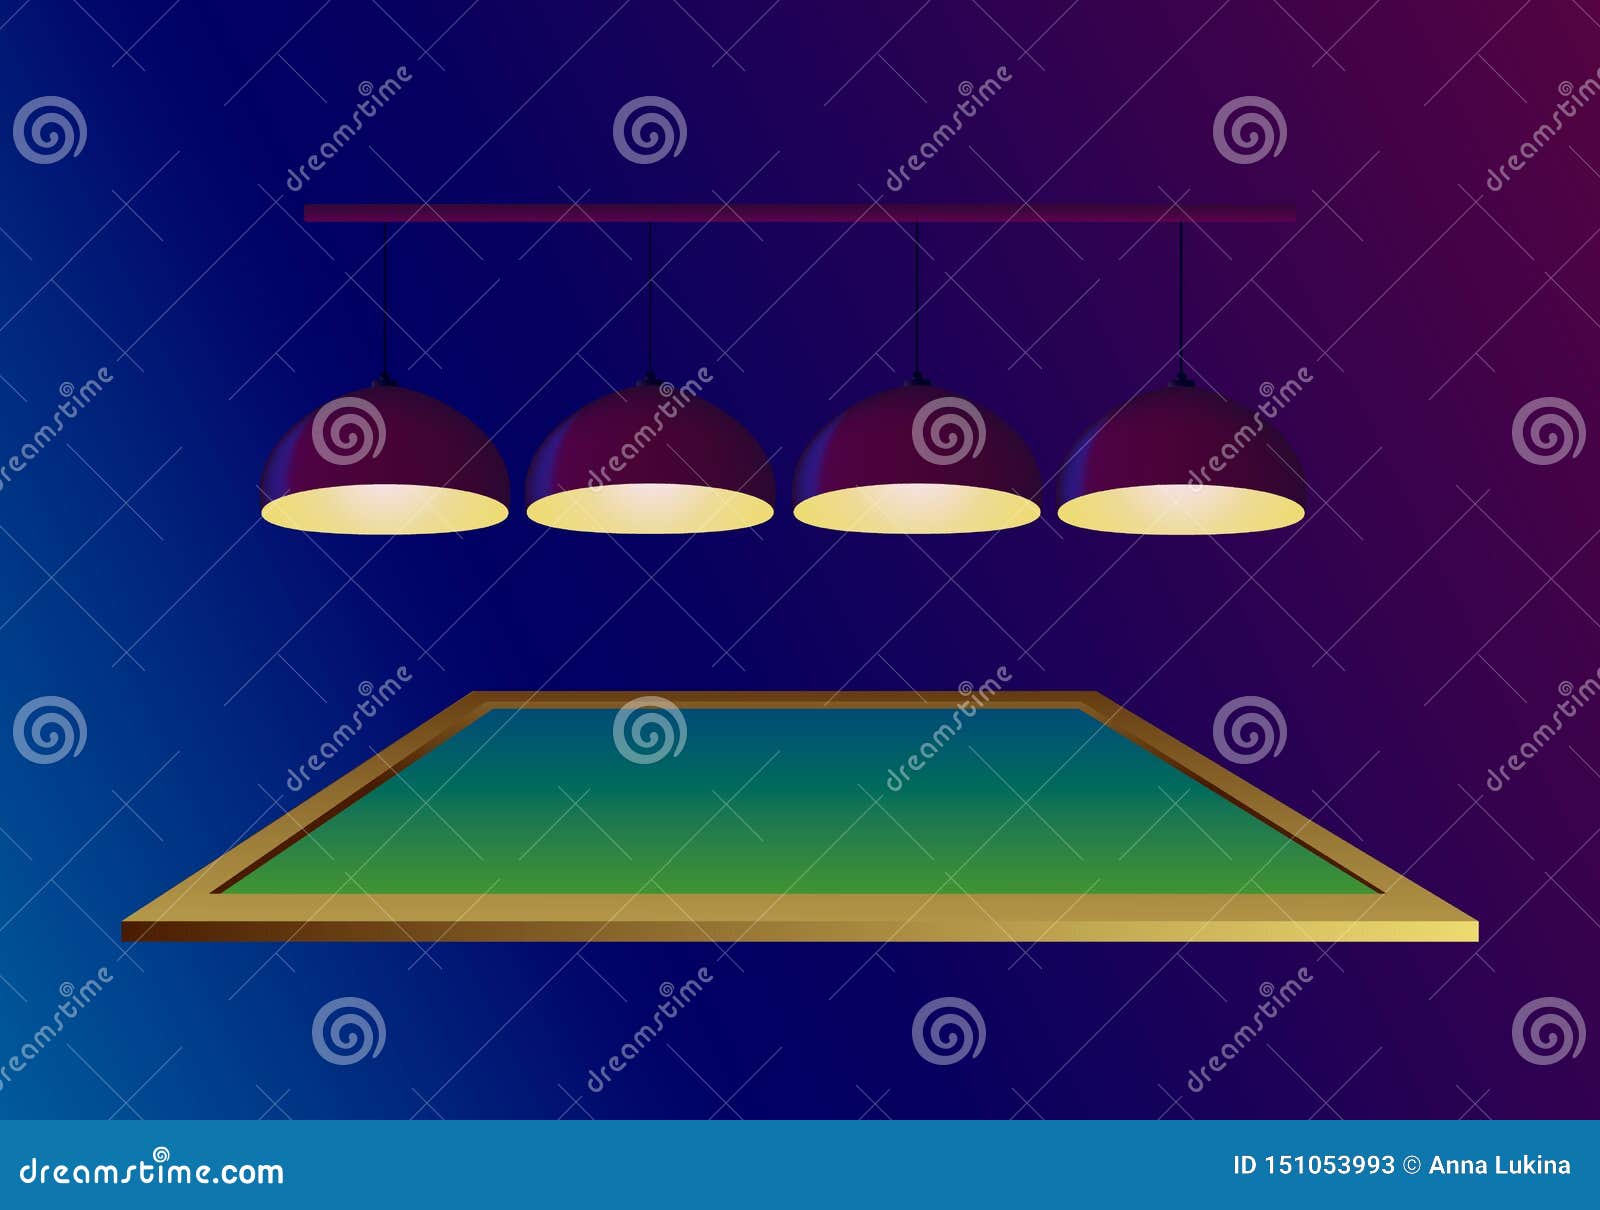 pool billiard table with four illuminating ceiling lamps on dark blue background.   flyer in realistic style.